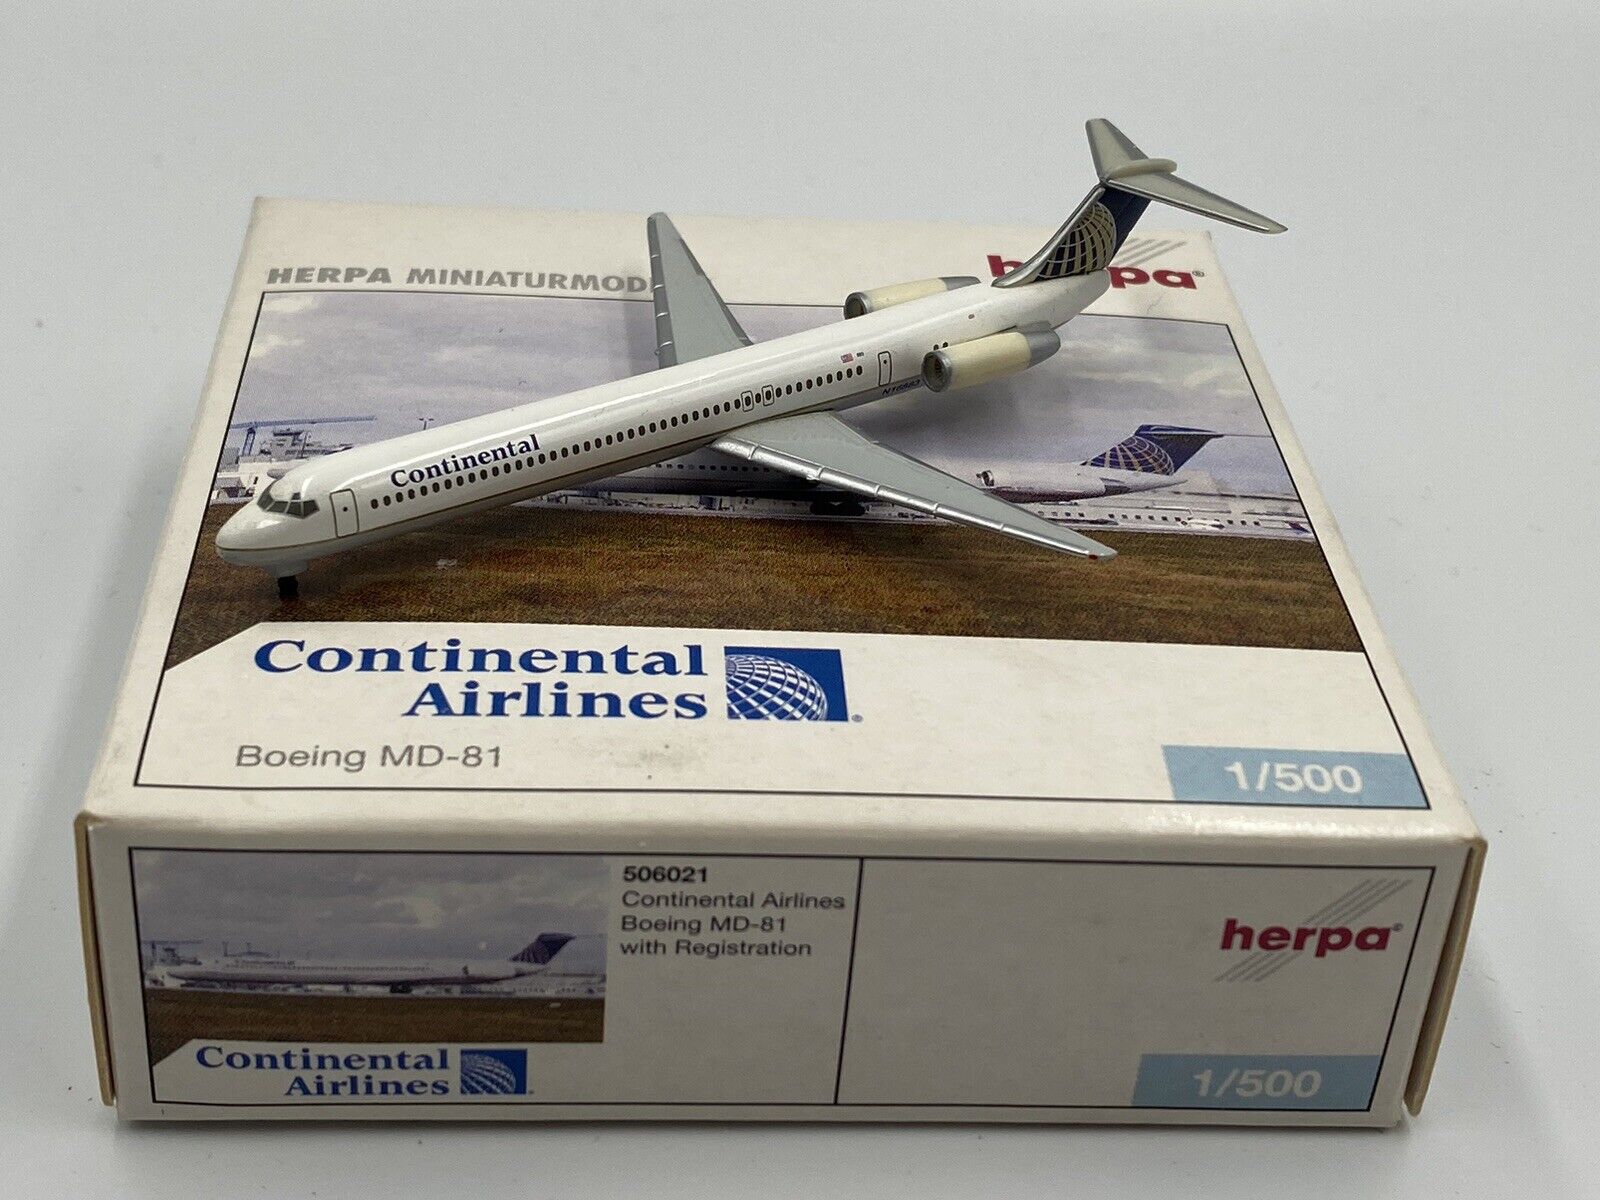 HERPA WINGS (506021) 1:500 CONTINENTAL AIRLINES BOEING MD-81 BOXED 